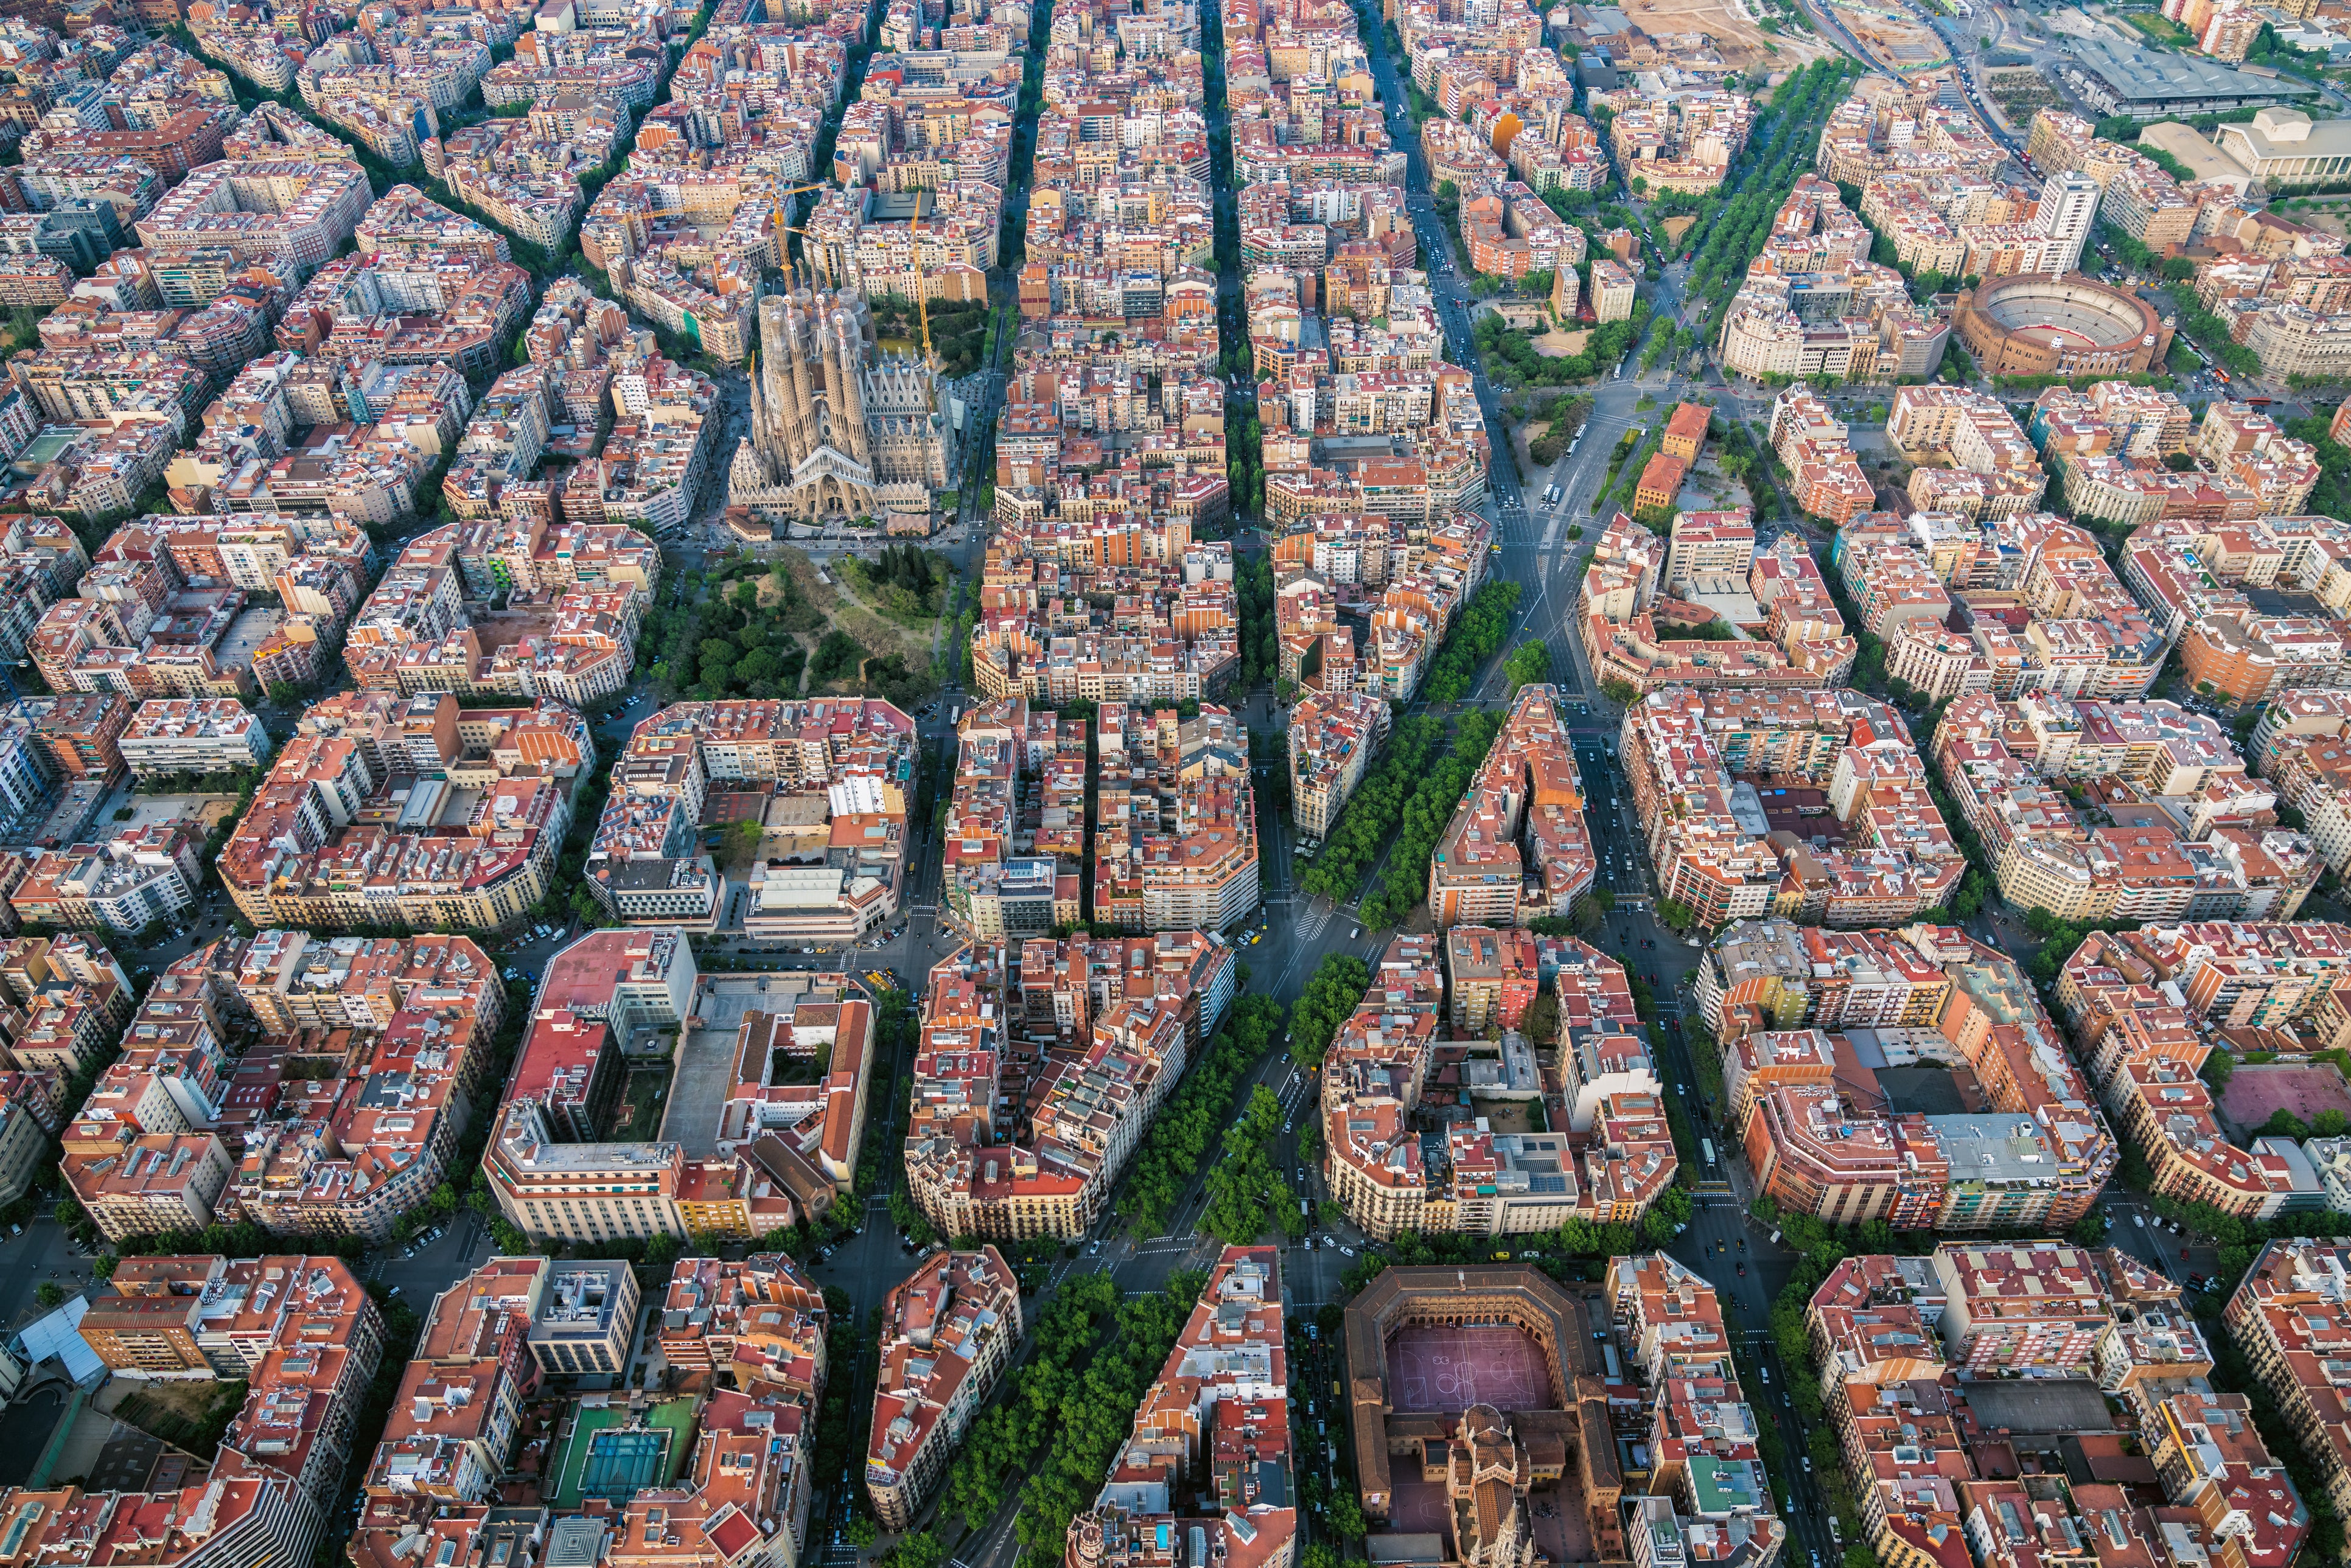 Barcelona frequently endures heatwaves and 2021 was its warmest year in over 200 years